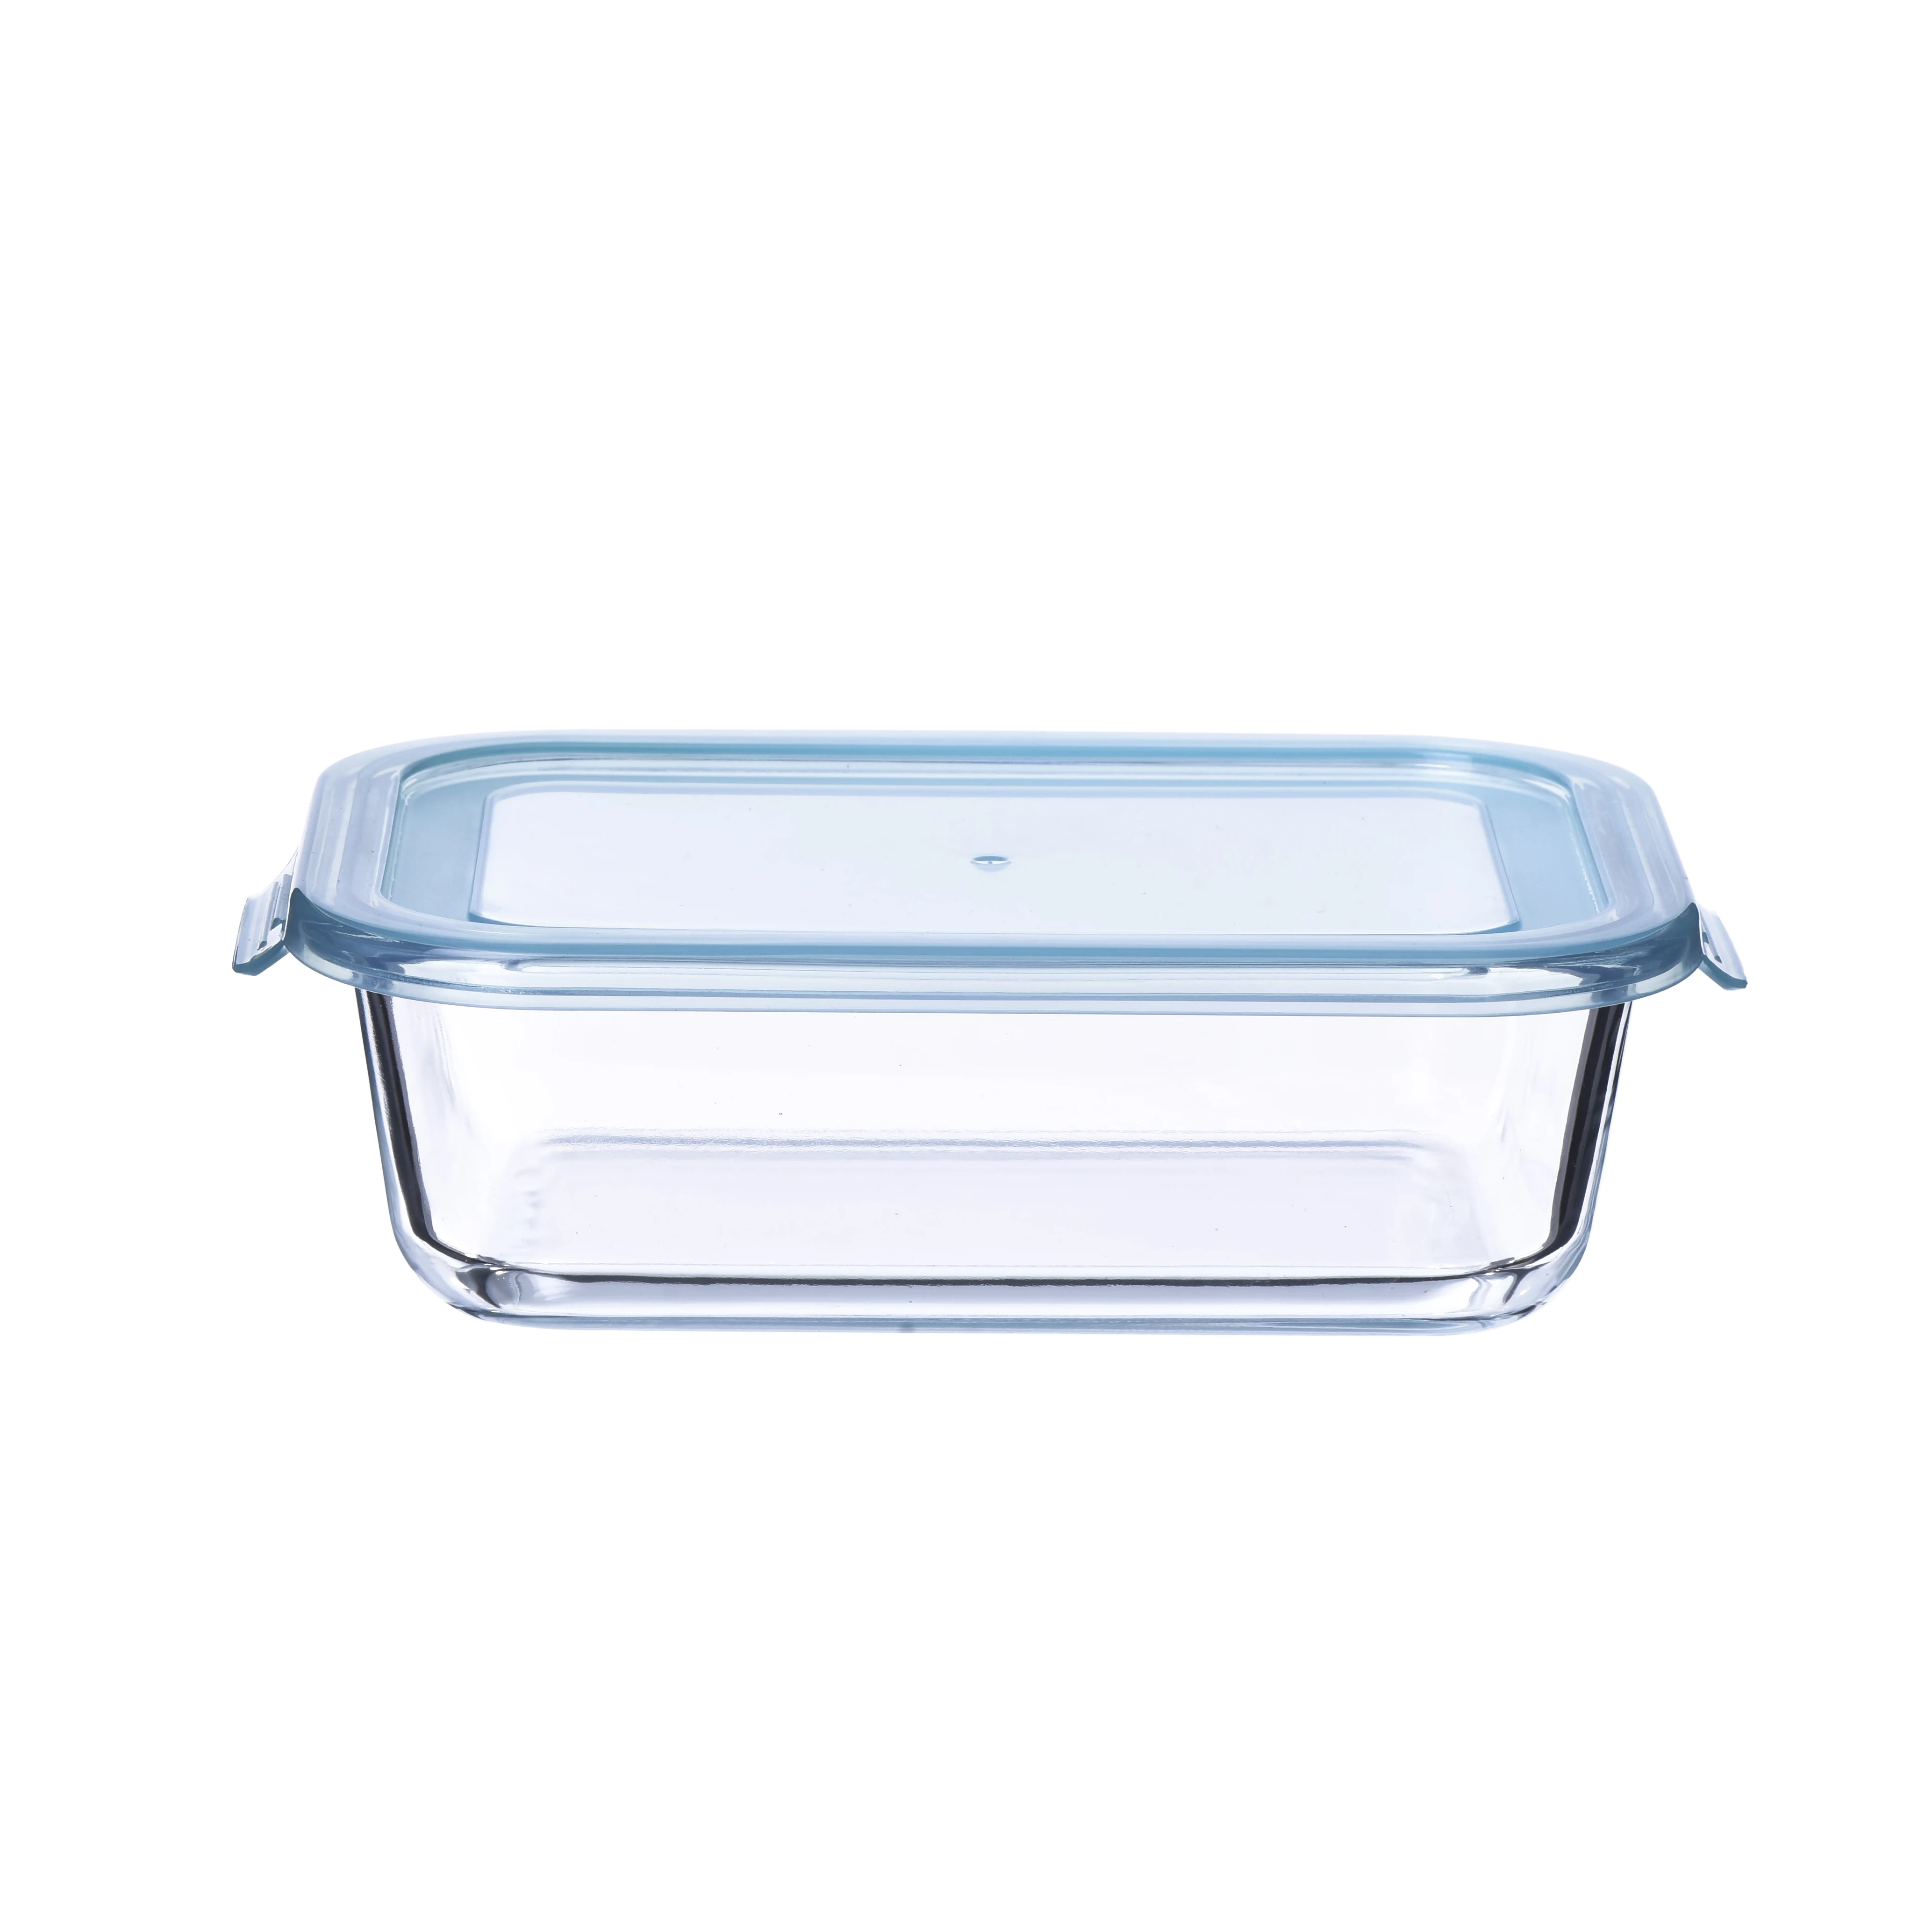 3pcs Set Glassware Kitchenware Heat Resistant Tempered Glass Bowl for Microwave Oven High Borosilicate Food Storage Container